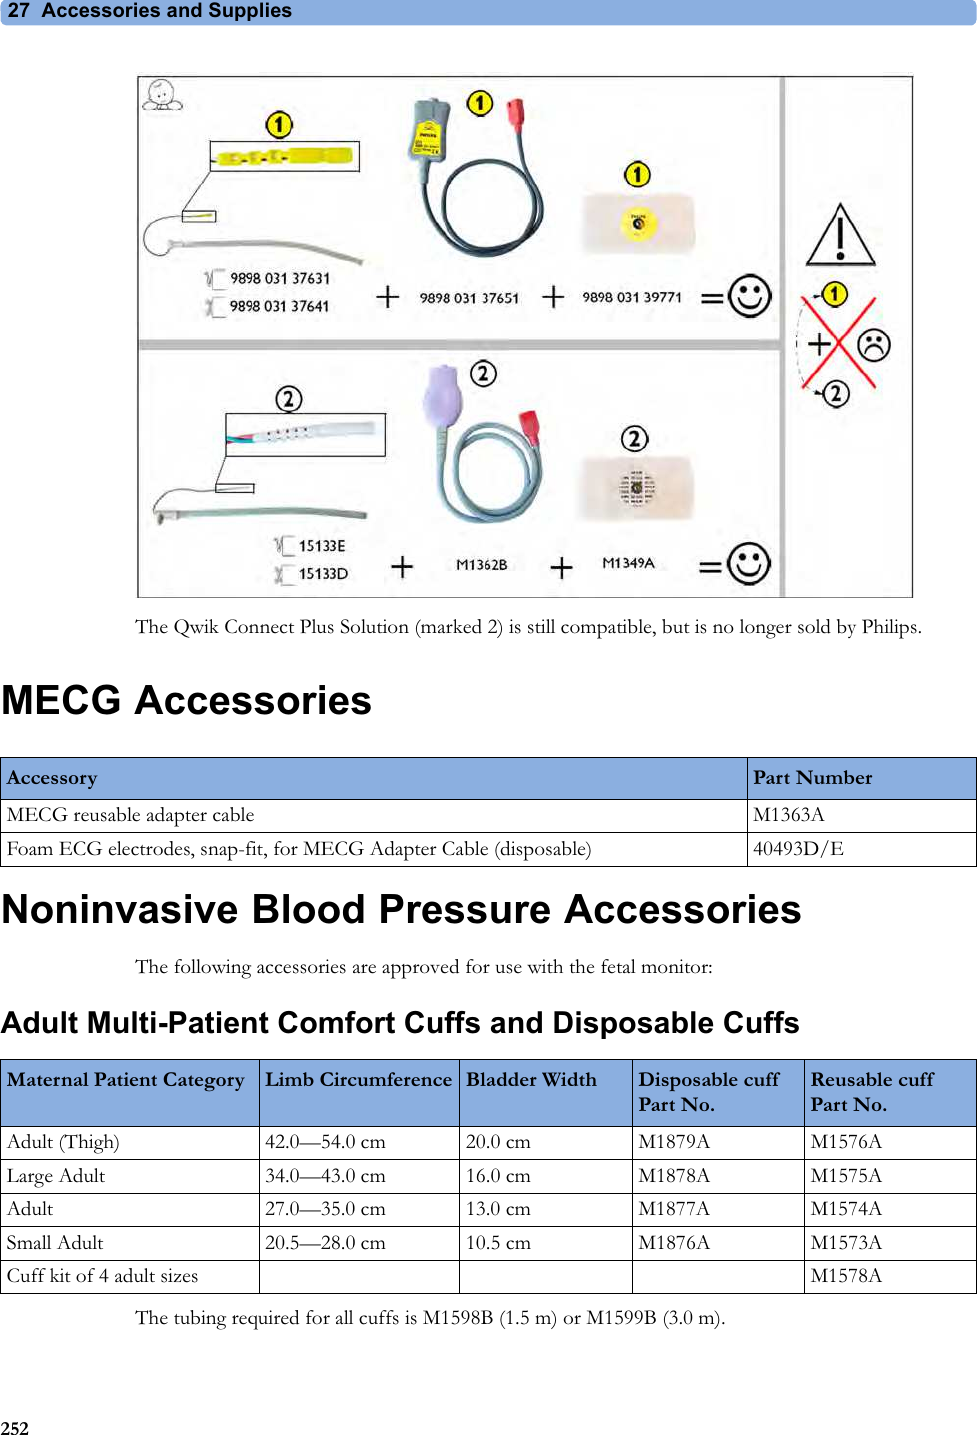 27  Accessories and Supplies252The Qwik Connect Plus Solution (marked 2) is still compatible, but is no longer sold by Philips. MECG AccessoriesNoninvasive Blood Pressure AccessoriesThe following accessories are approved for use with the fetal monitor:Adult Multi-Patient Comfort Cuffs and Disposable CuffsThe tubing required for all cuffs is M1598B (1.5 m) or M1599B (3.0 m).Accessory Part NumberMECG reusable adapter cable M1363AFoam ECG electrodes, snap-fit, for MECG Adapter Cable (disposable) 40493D/EMaternal Patient Category Limb Circumference Bladder Width Disposable cuff Part No.Reusable cuff Part No.Adult (Thigh) 42.0—54.0 cm 20.0 cm M1879A M1576ALarge Adult 34.0—43.0 cm 16.0 cm M1878A M1575AAdult 27.0—35.0 cm 13.0 cm M1877A M1574ASmall Adult 20.5—28.0 cm 10.5 cm M1876A M1573ACuff kit of 4 adult sizes M1578A